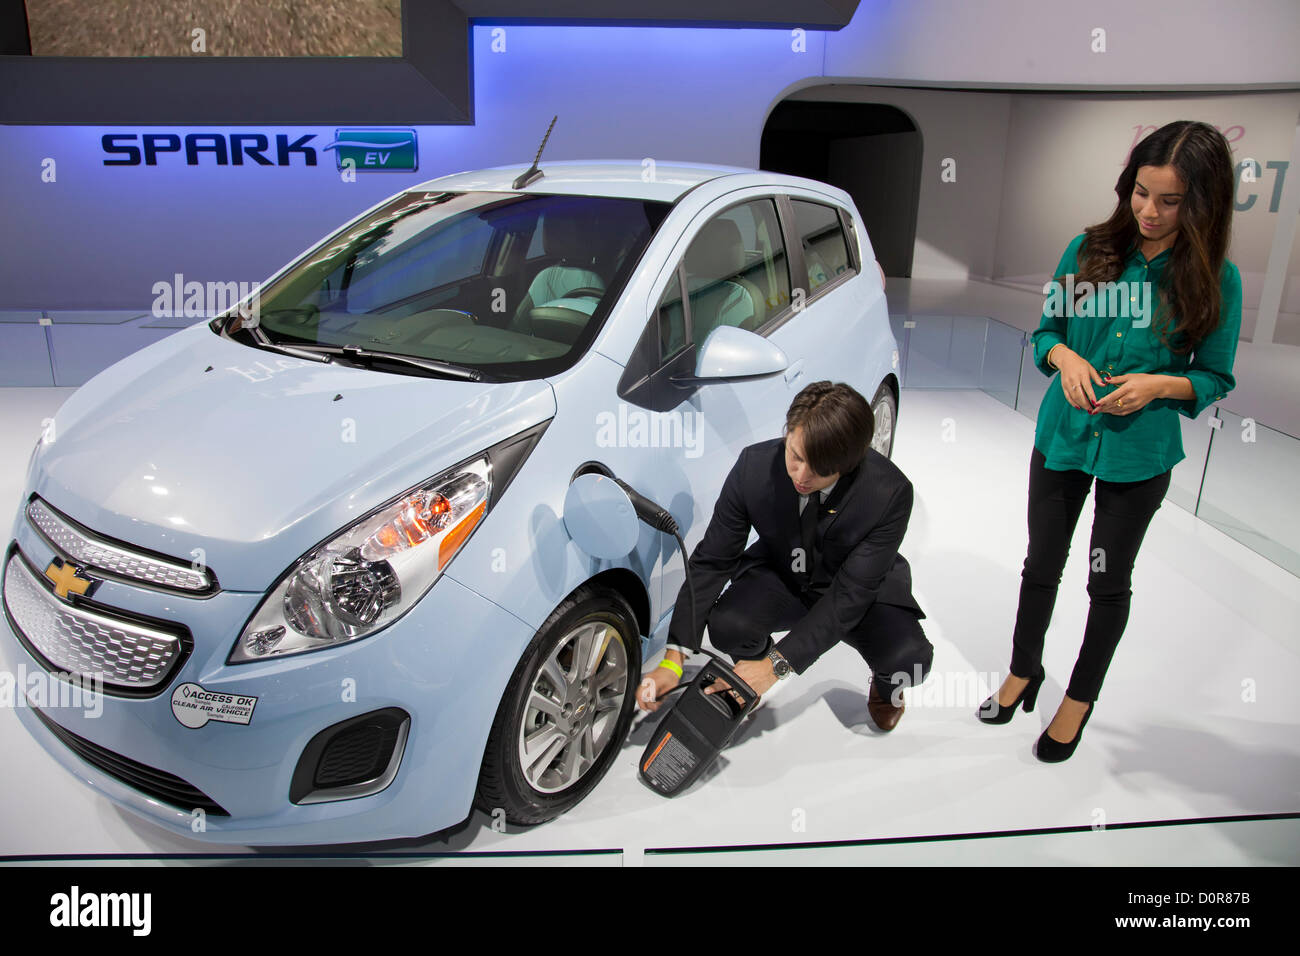 2013 Chevy Spark EV. New 2013 Electric and Hybrid Green cars are featured at the Los Angeles Auto show on November 29, 2012. Los Angeles Convention Center, California, USA Stock Photo